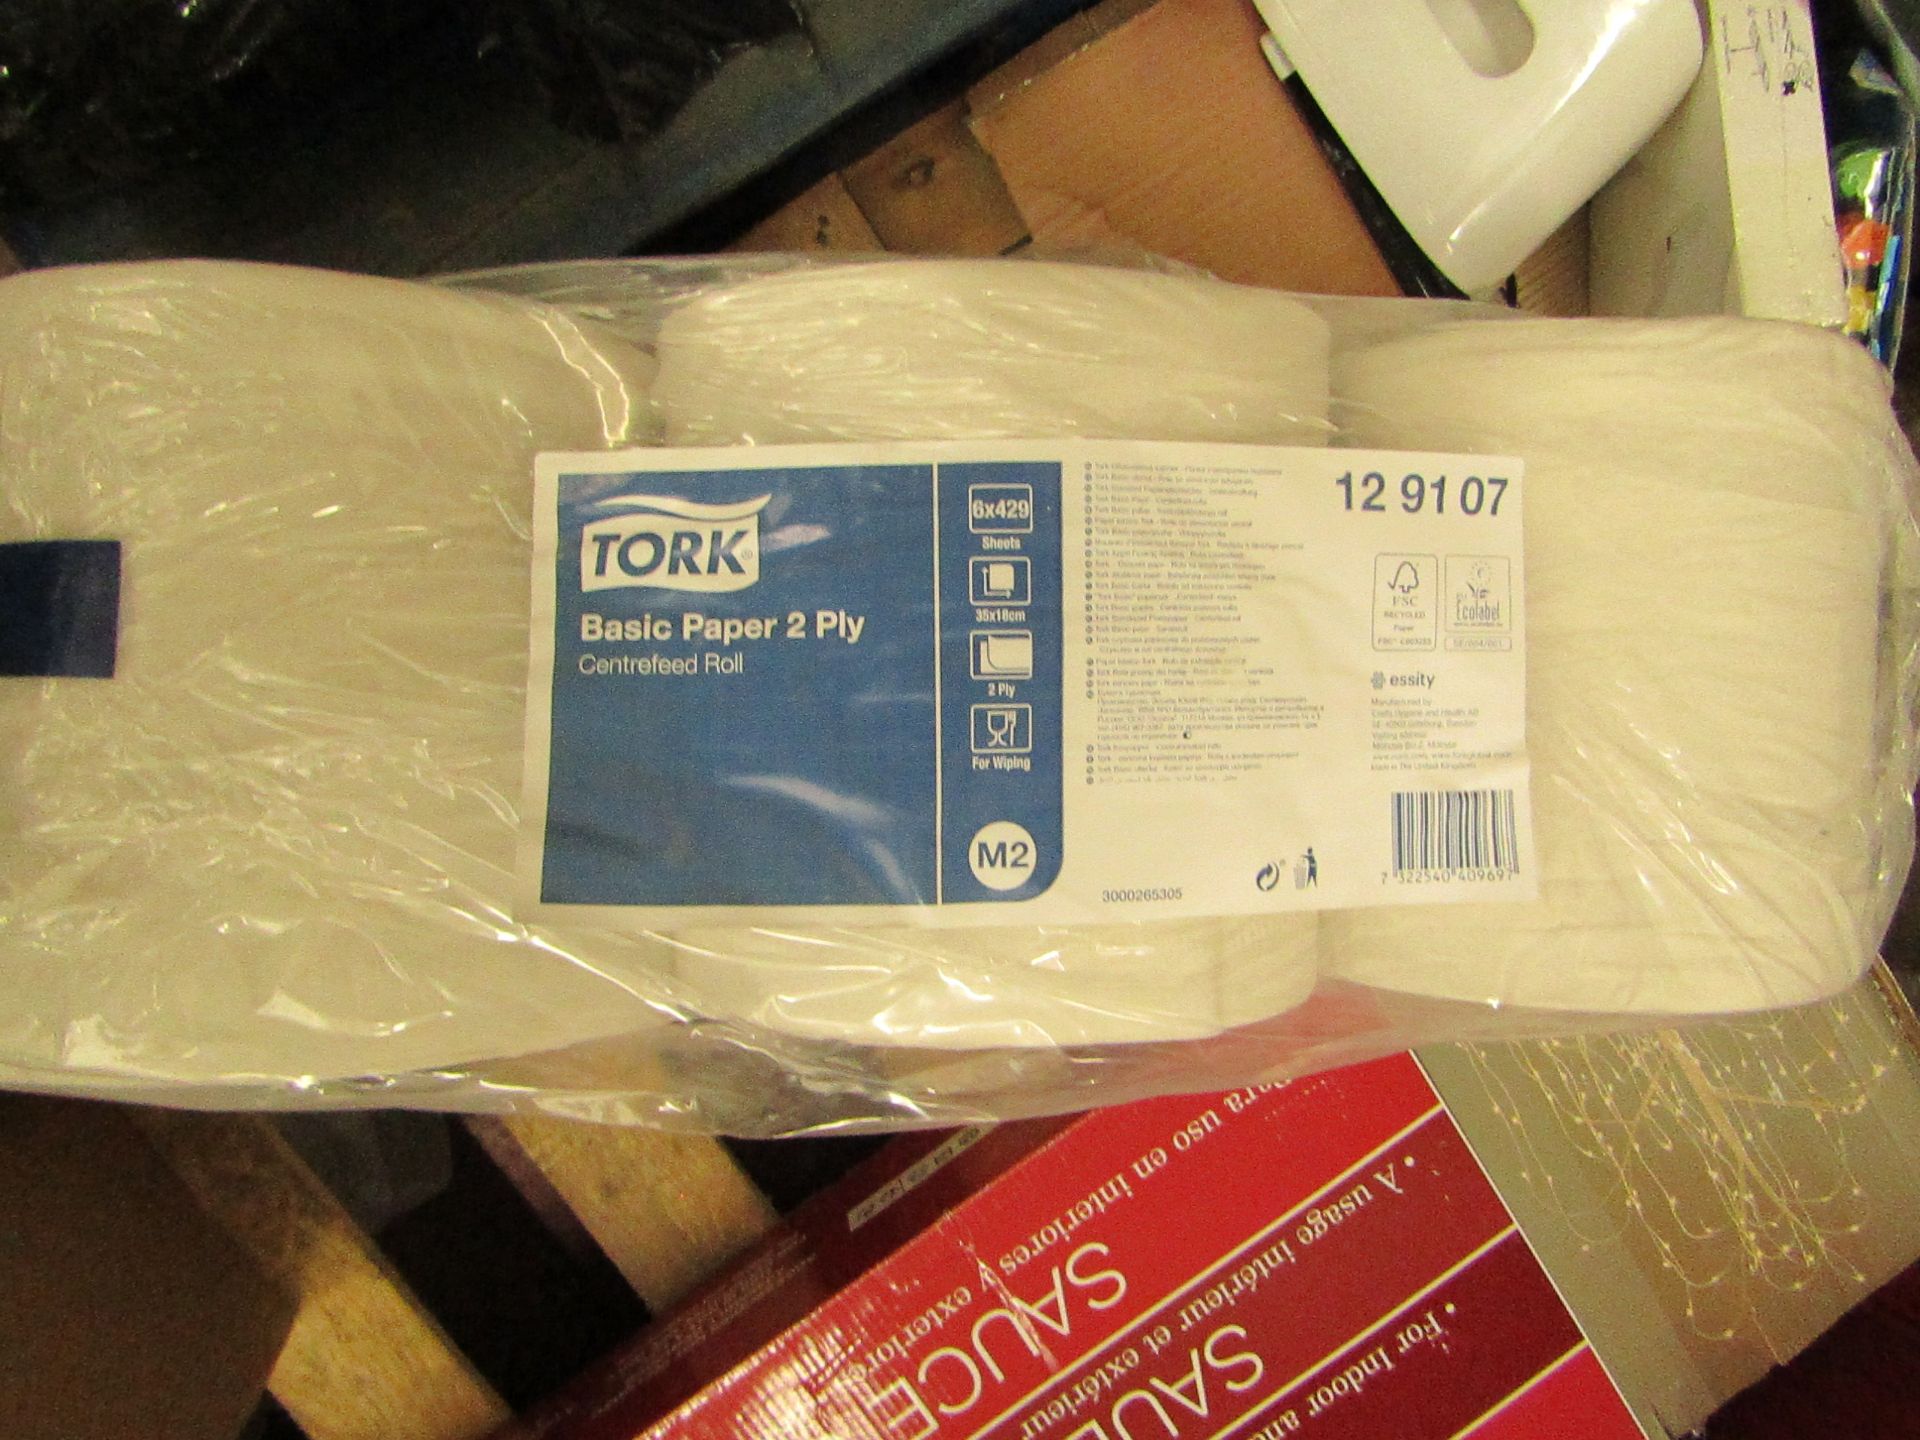 6 x 2ply Tork Centrefeed Rolls. 429 Sheets in each Roll. New & Packaged